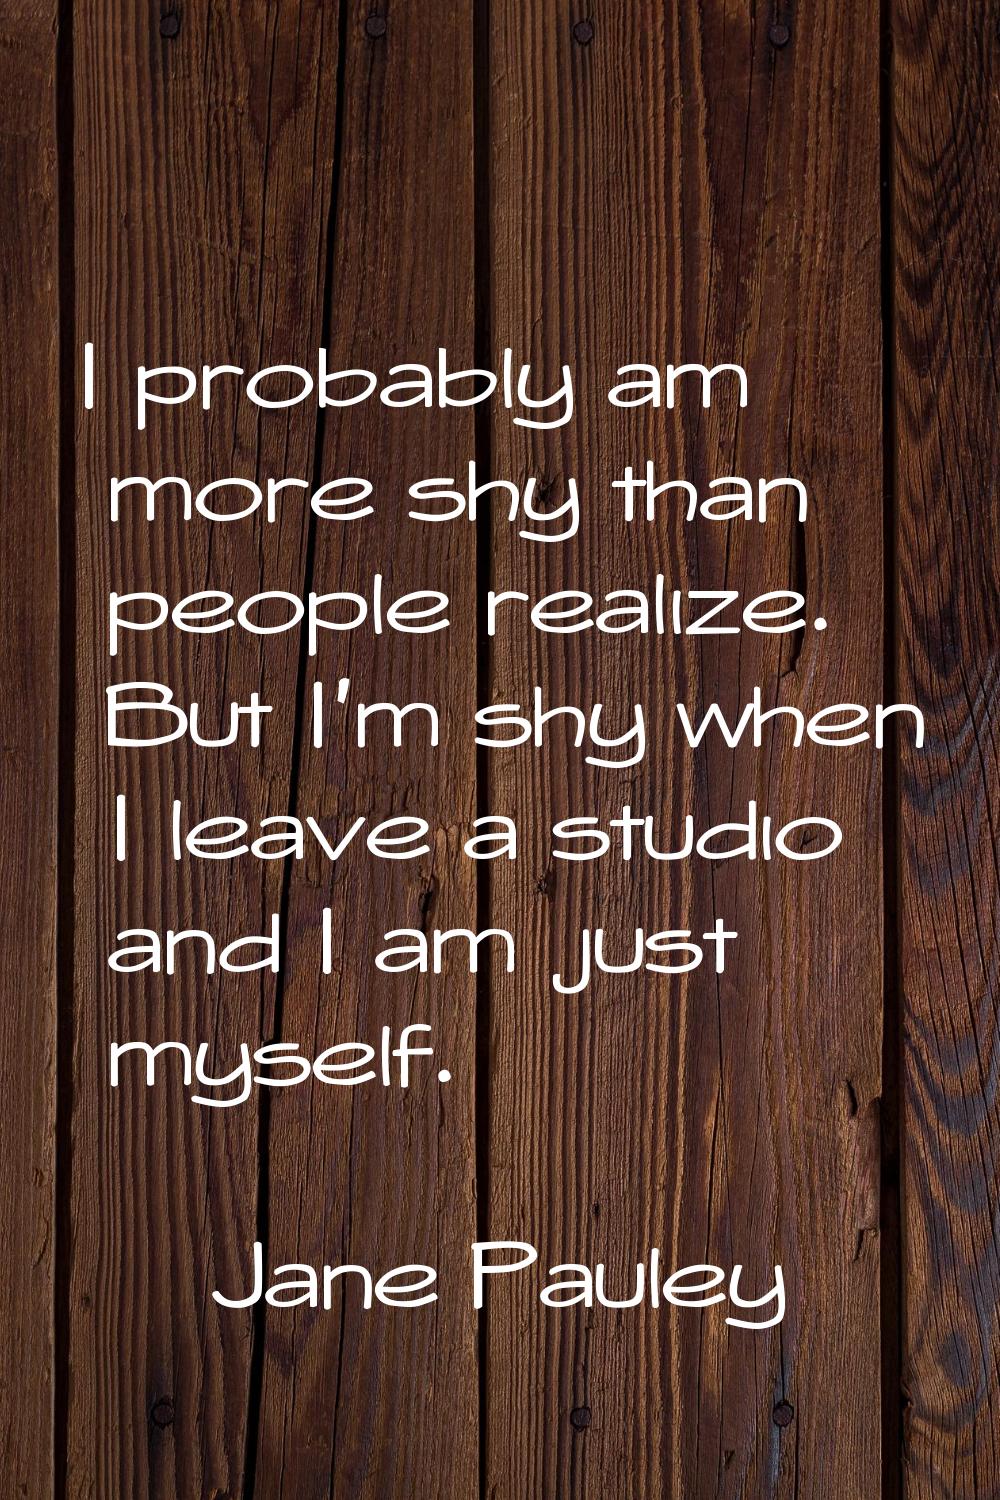 I probably am more shy than people realize. But I'm shy when I leave a studio and I am just myself.